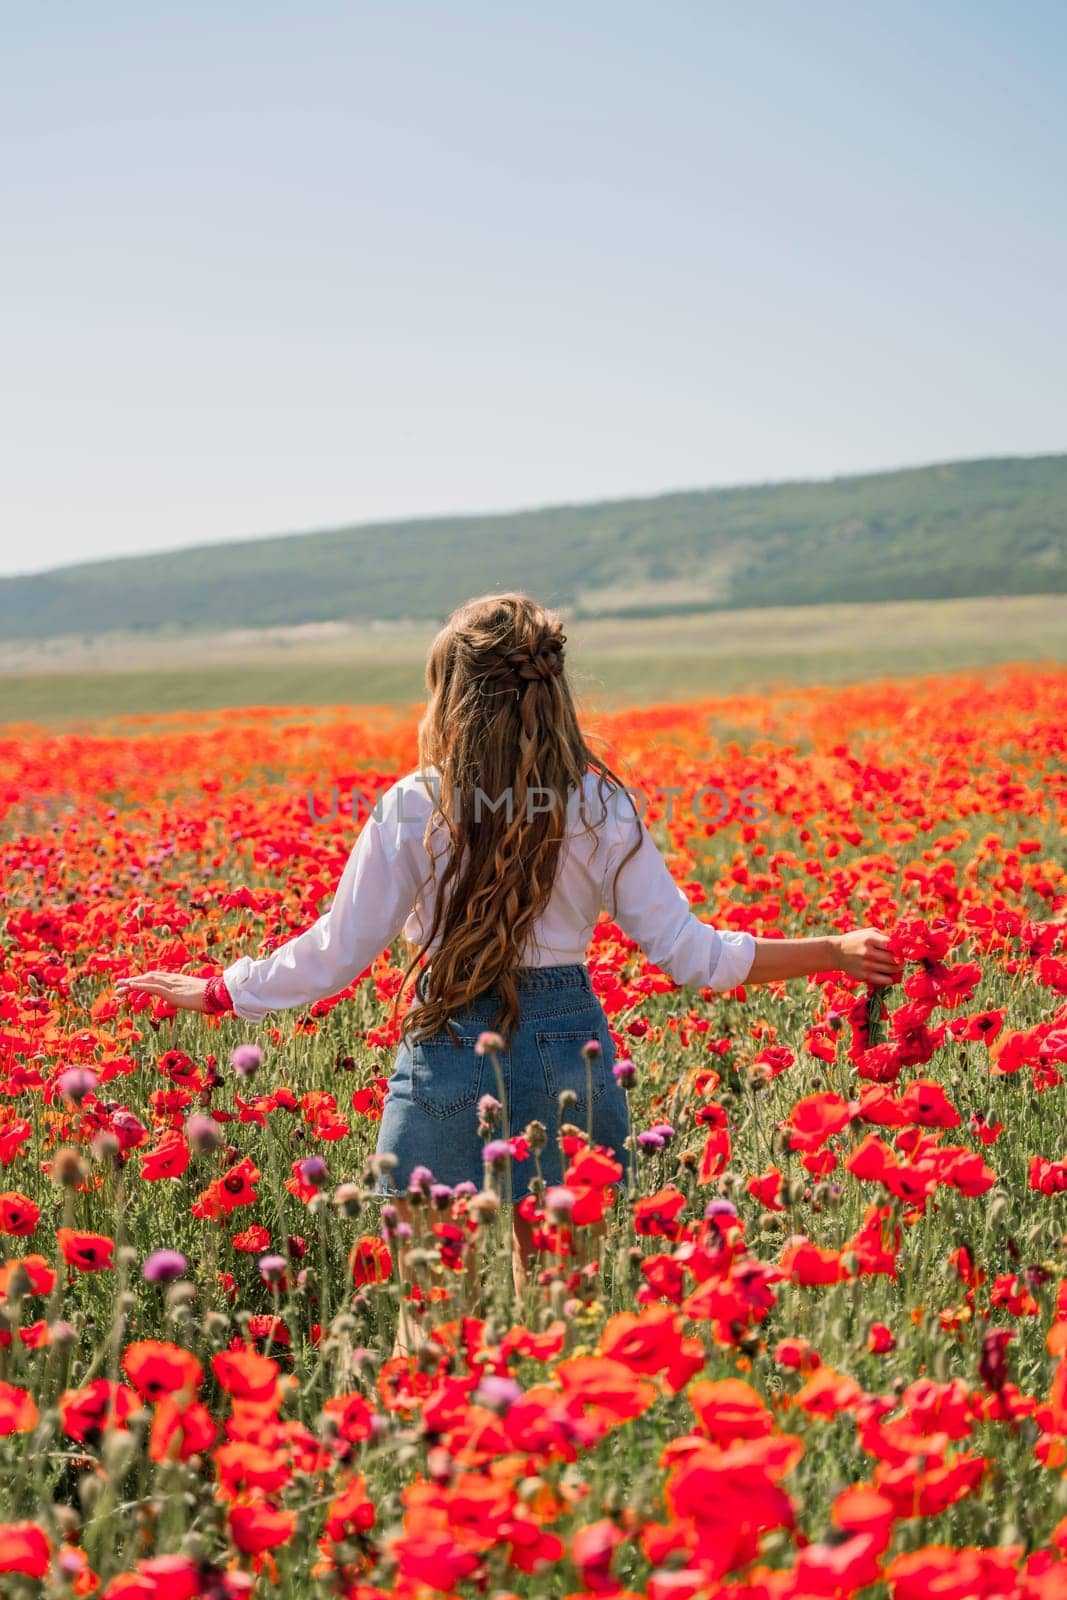 Happy woman in a poppy field in a white shirt and denim skirt with a wreath of poppies in her hand posing and enjoying the poppy field. by Matiunina